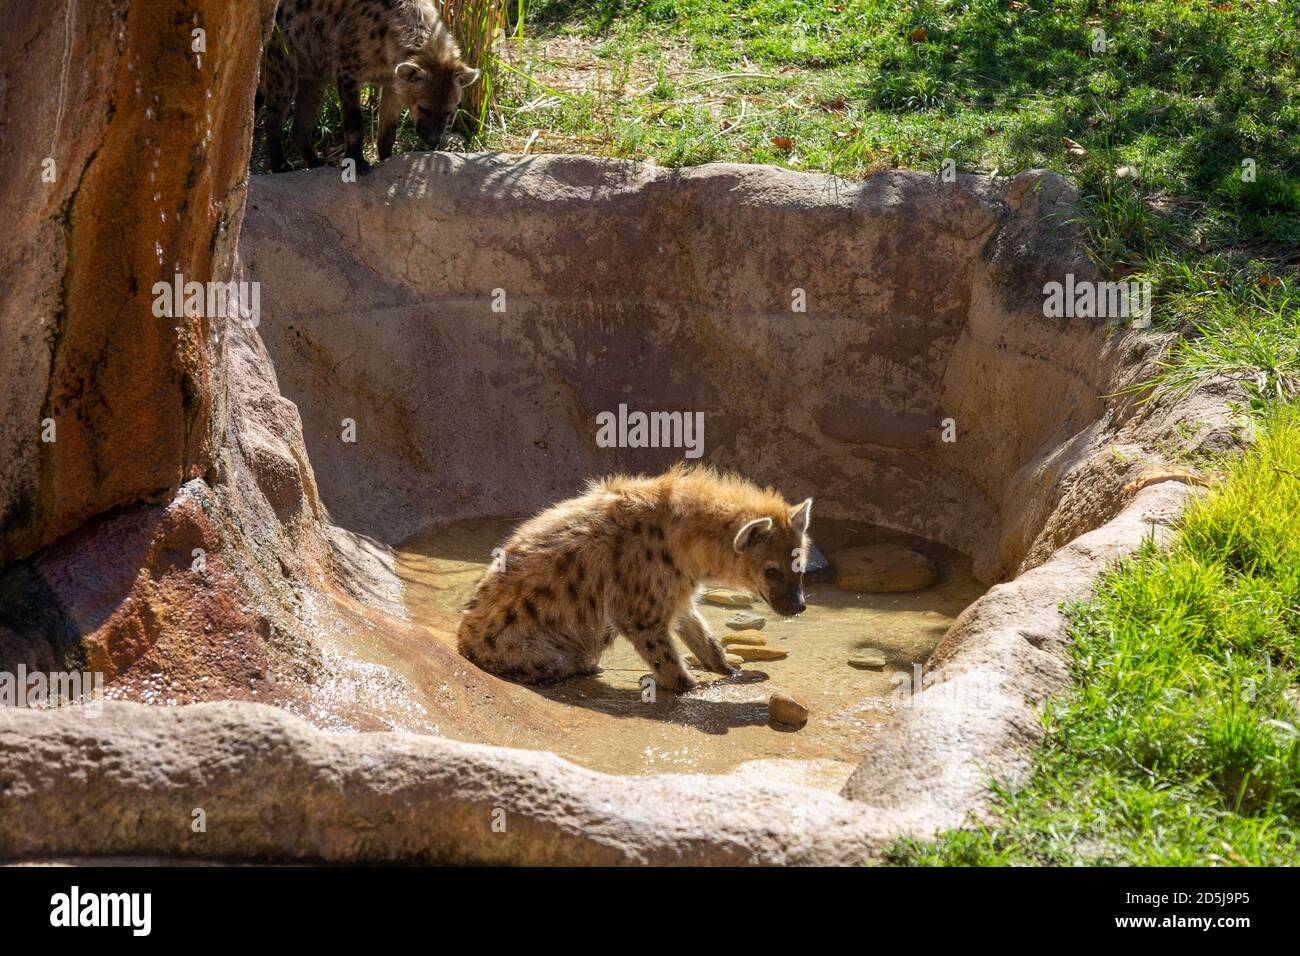 A hyena looks down on another in their exhibit at the Fort Wayne Children's Zoo. Stock Photo